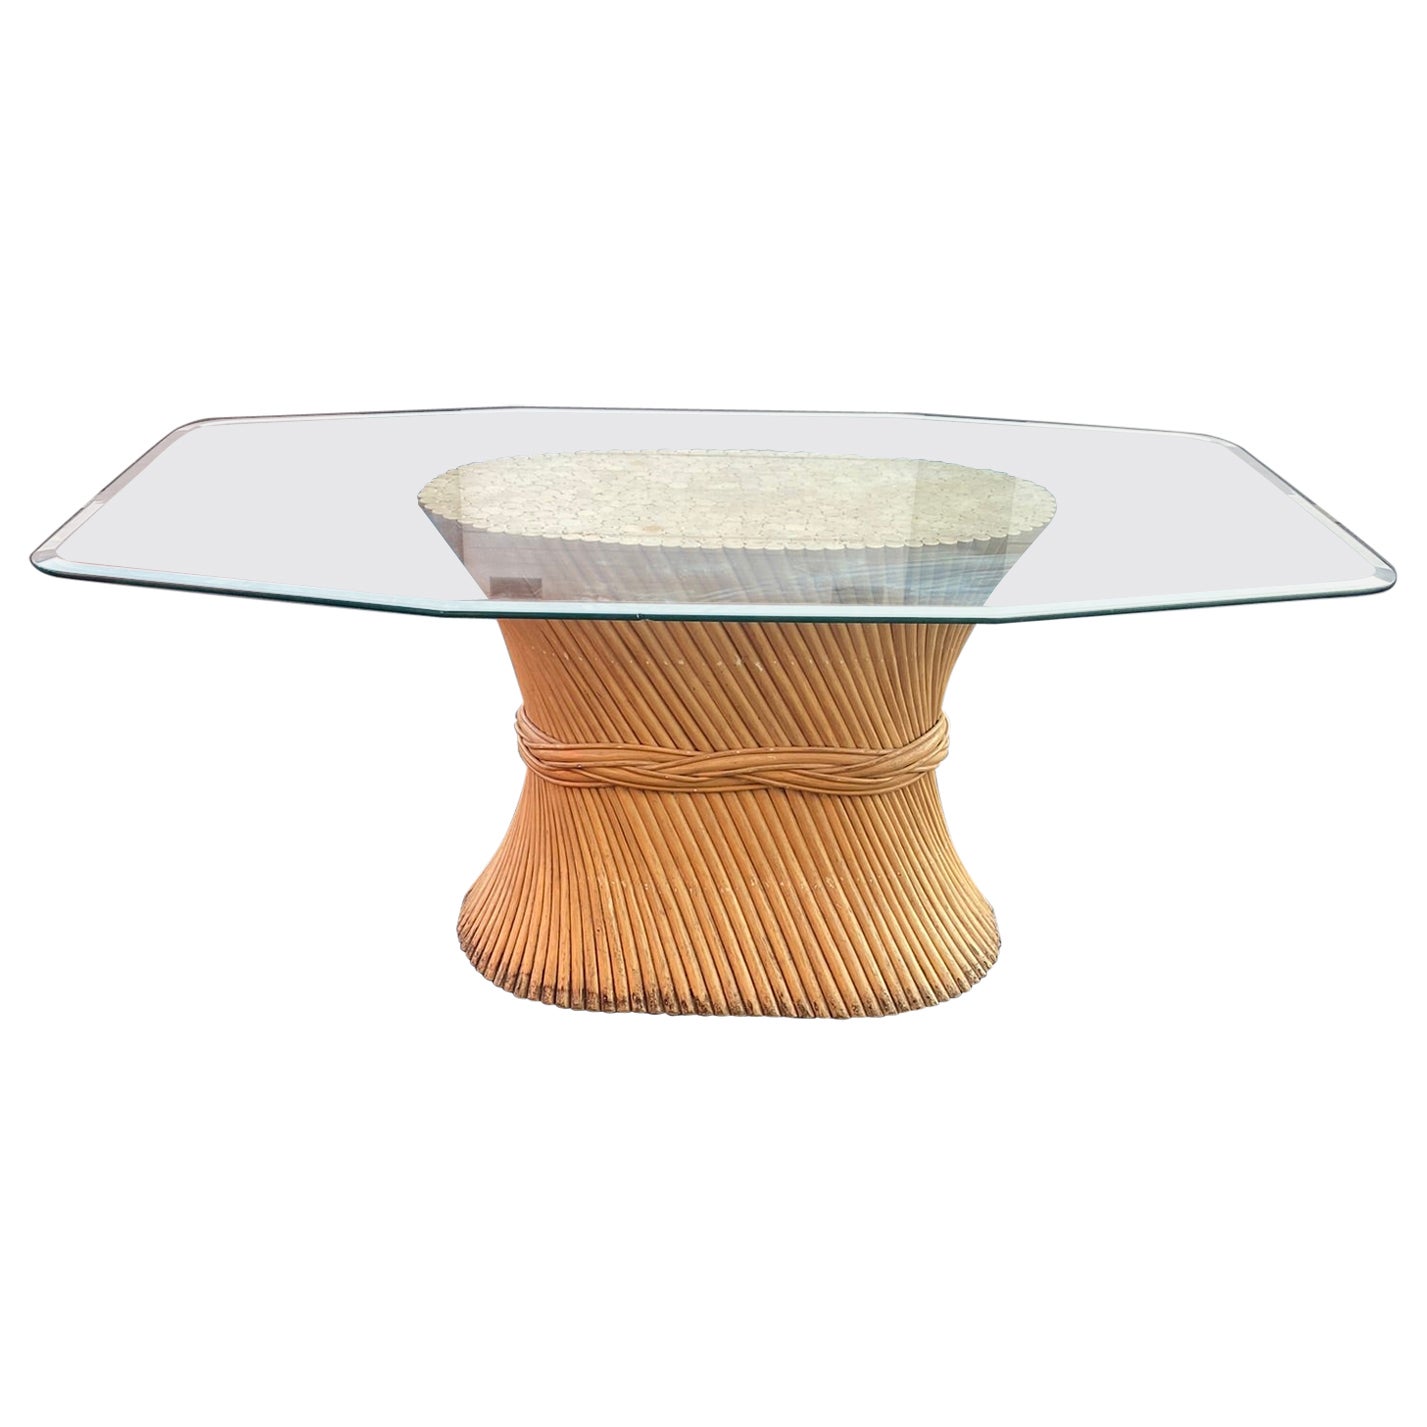 Elinor and John Mc GUIRE , Bamboo and Glass Dining Table circa 1970